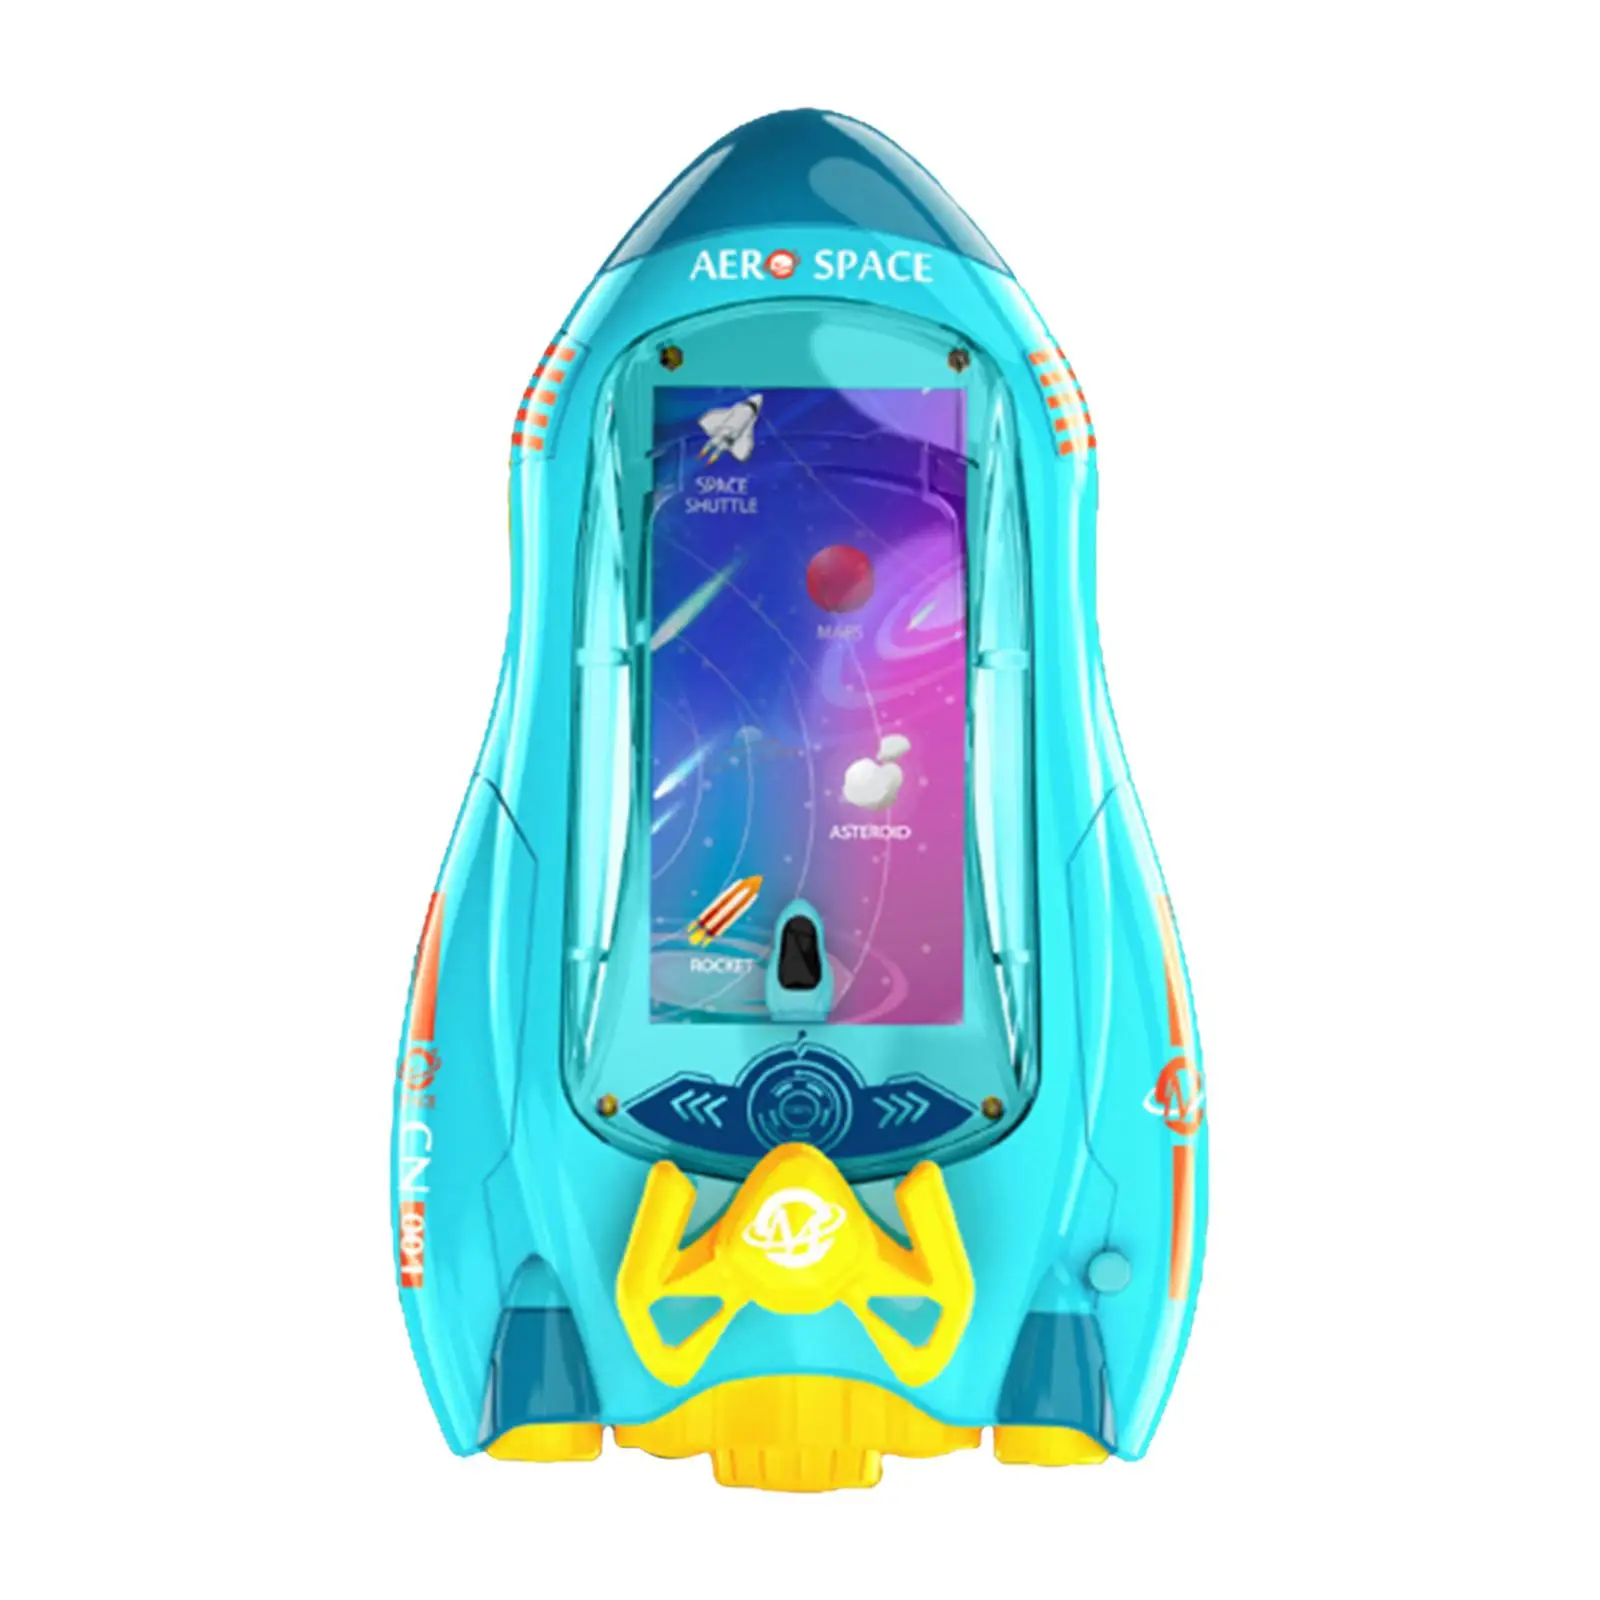 Space Adventure Musical Steering Wheel Toy Early Education Toy with Music Light Interactive for Children Birthday Gifts